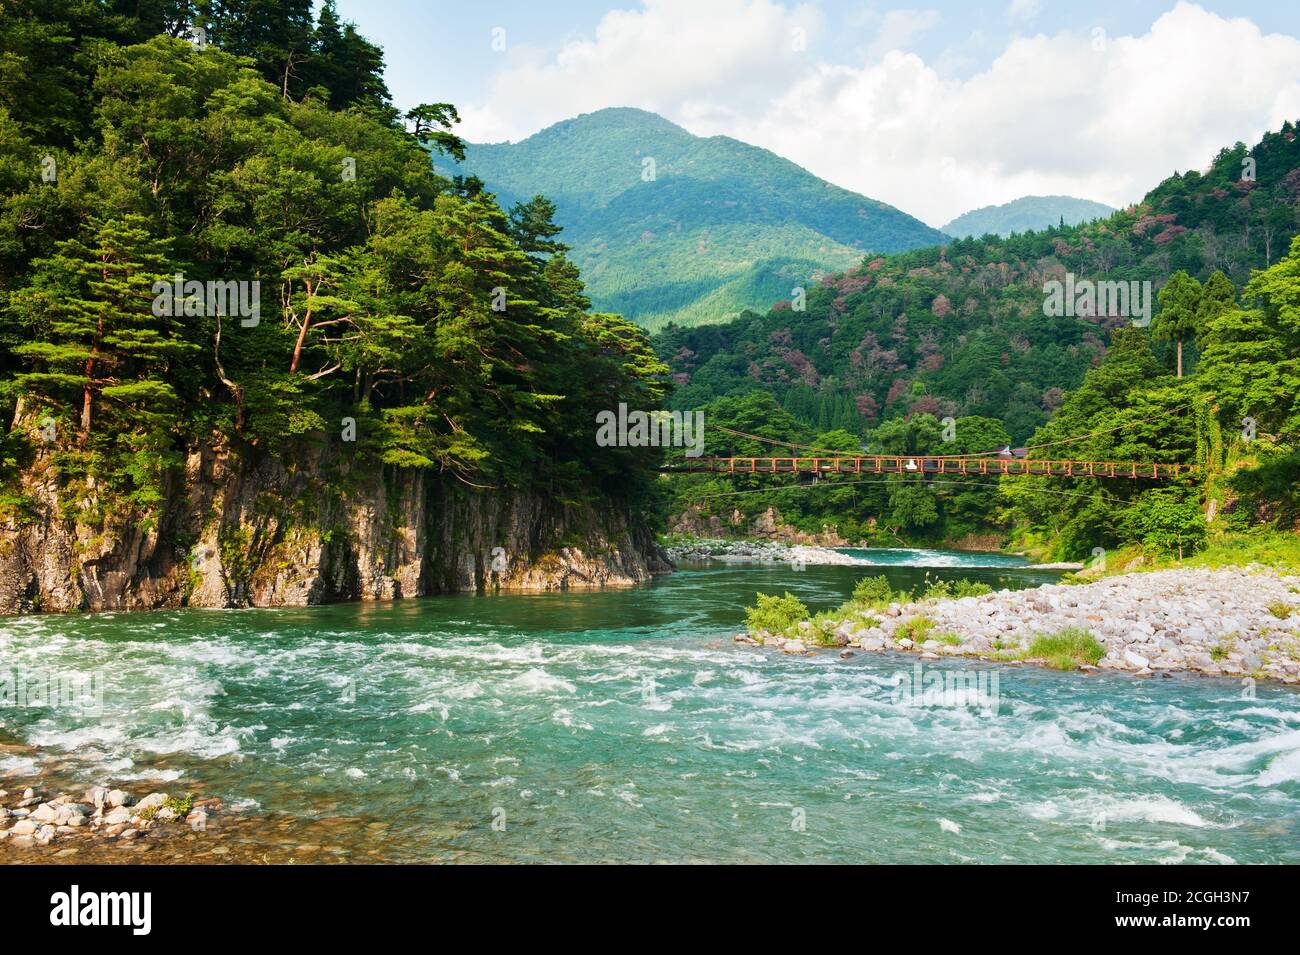 Beautiful landscape in the Japanese mountains with a wild river, red bridge and rock covered by typical pines Stock Photo